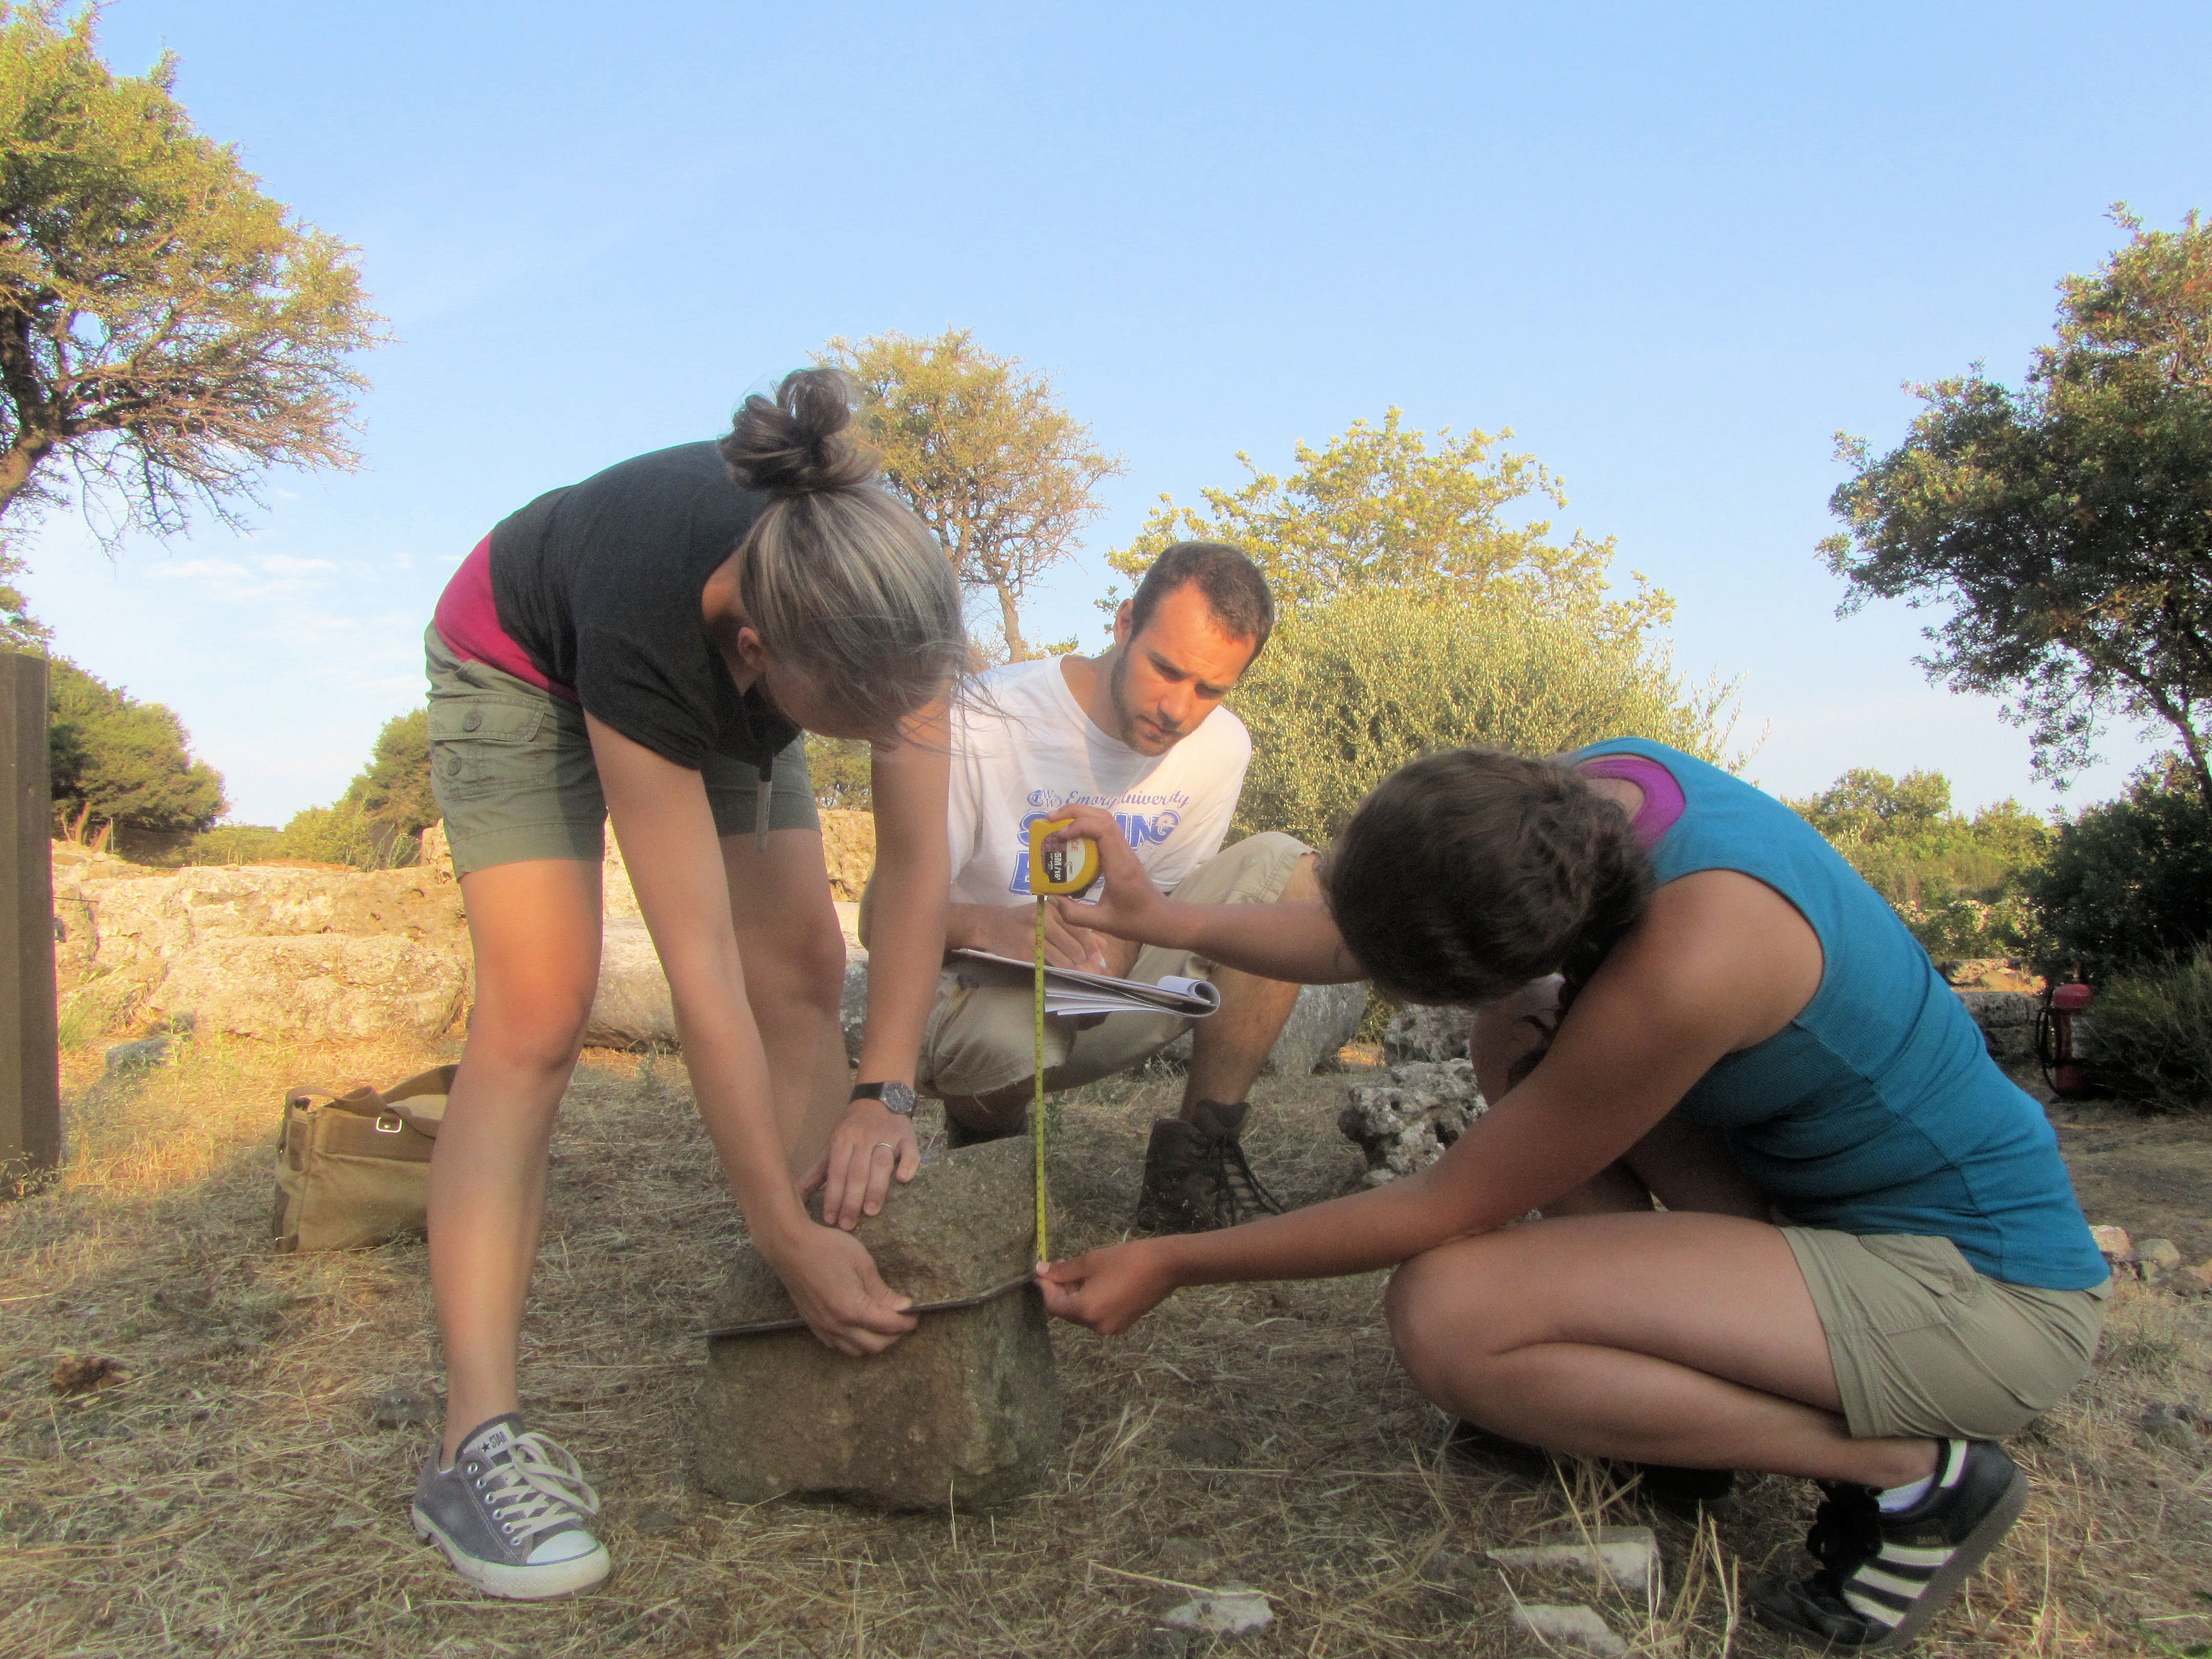 Jess, Hannah, and Zach measuring a Nike stone outside the Byzantine building.